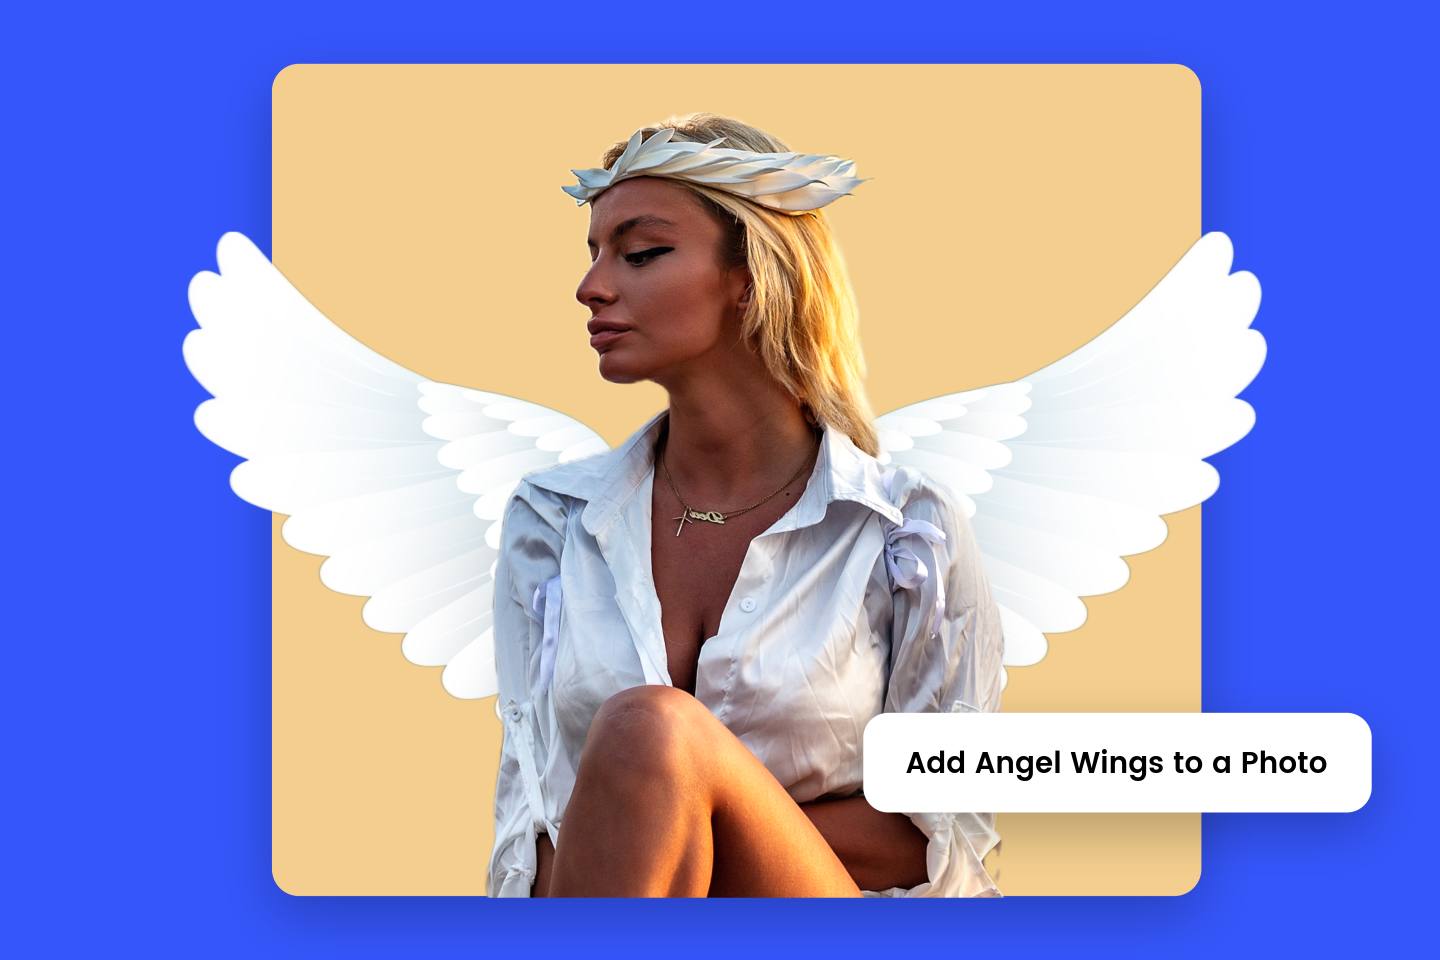 Add angel wings to a ladys photo